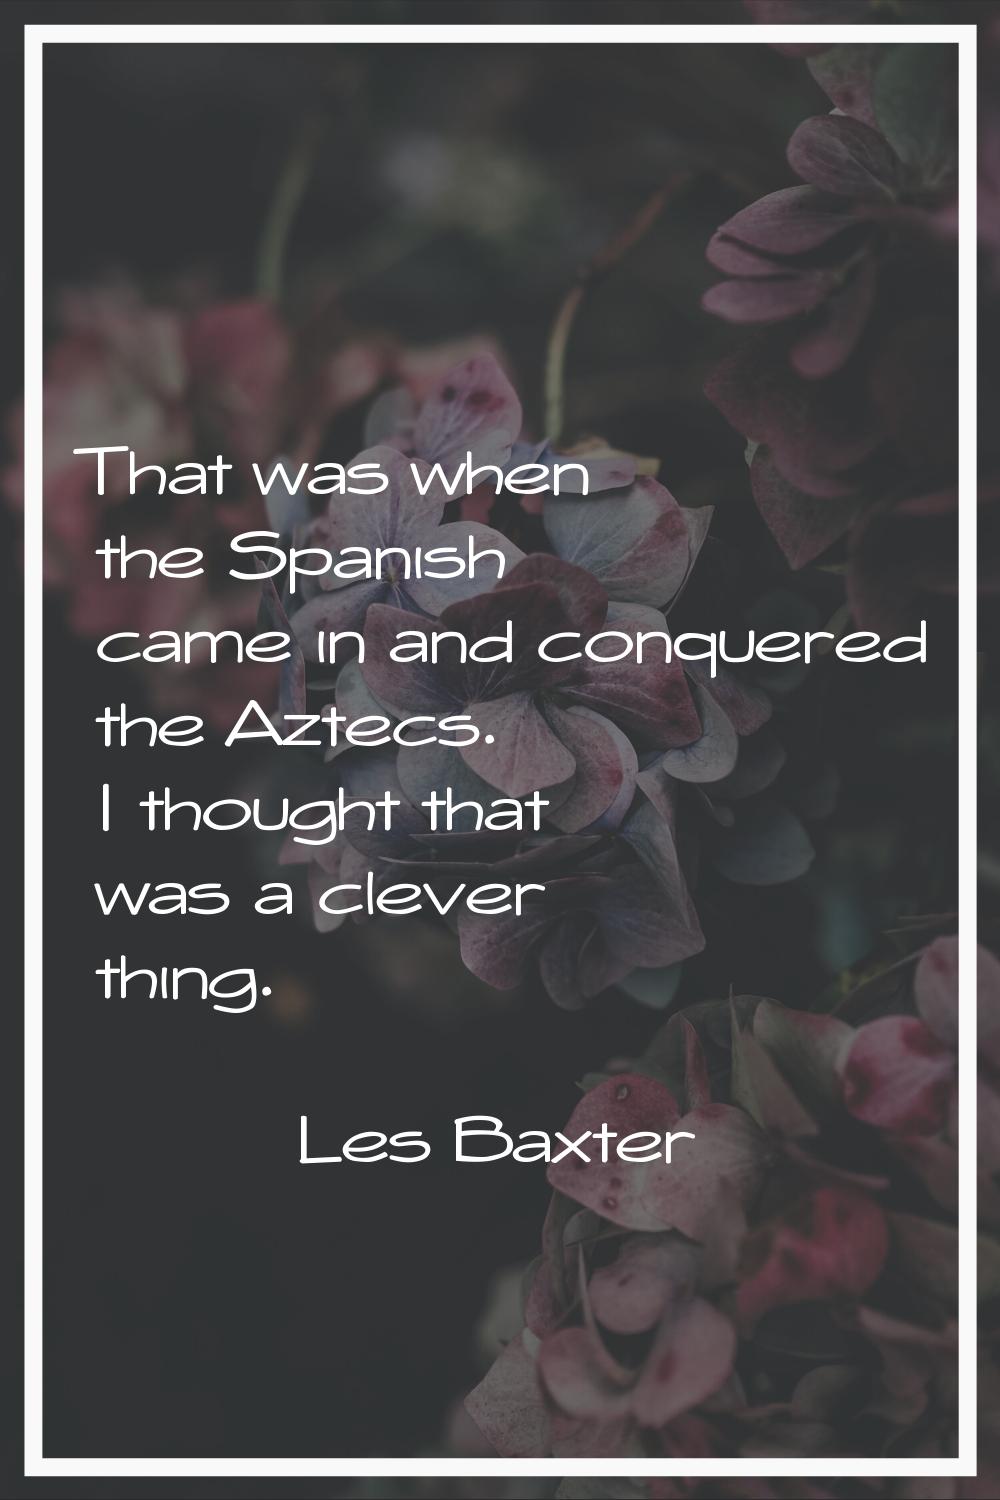 That was when the Spanish came in and conquered the Aztecs. I thought that was a clever thing.